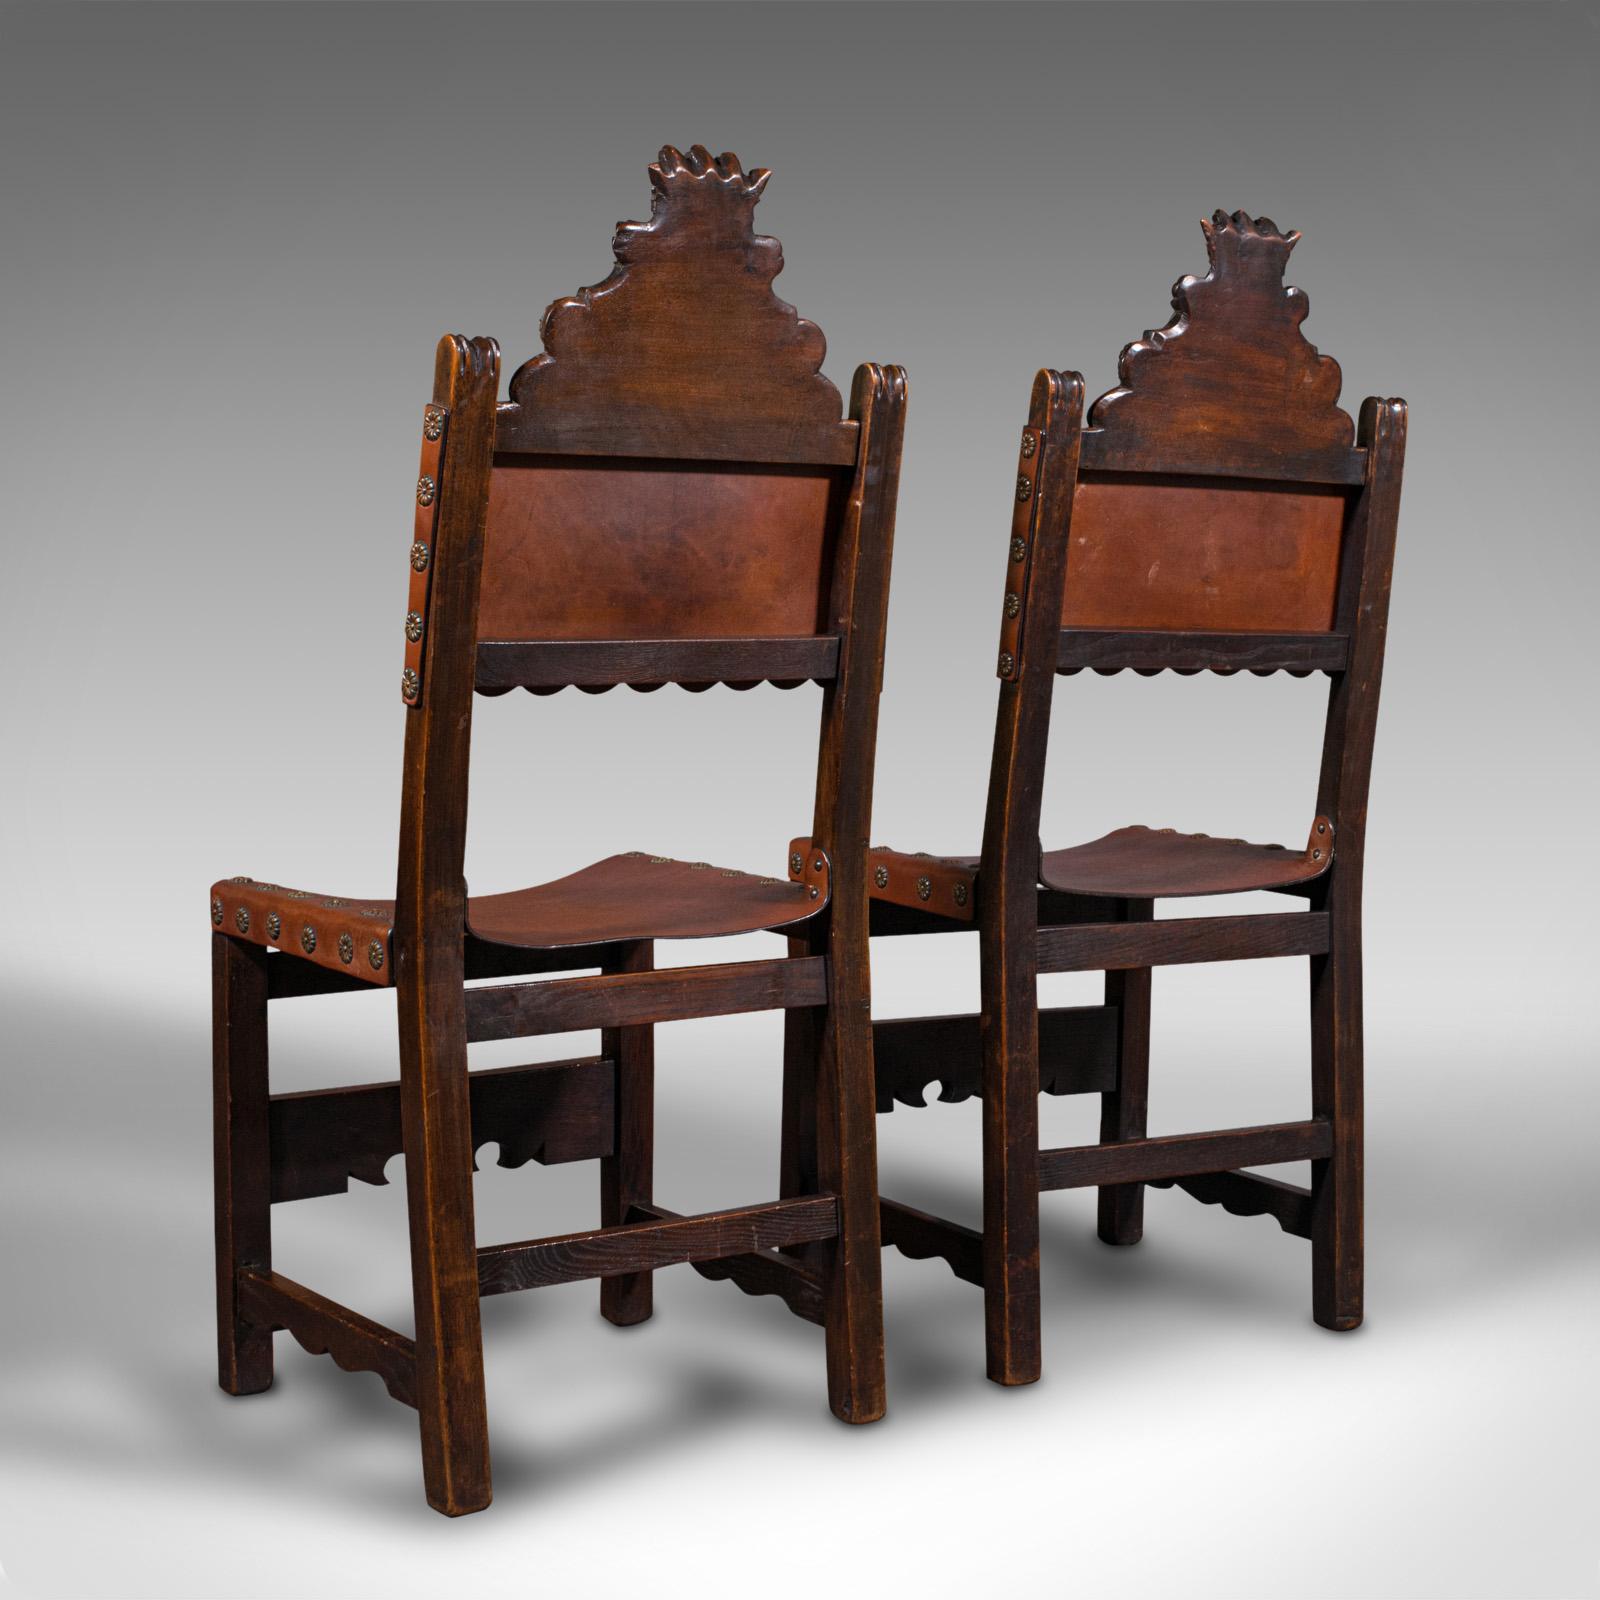 Pine Pair of Antique Hall Seats, Scottish, Side Chair, Jacobean Revival, Edwardian